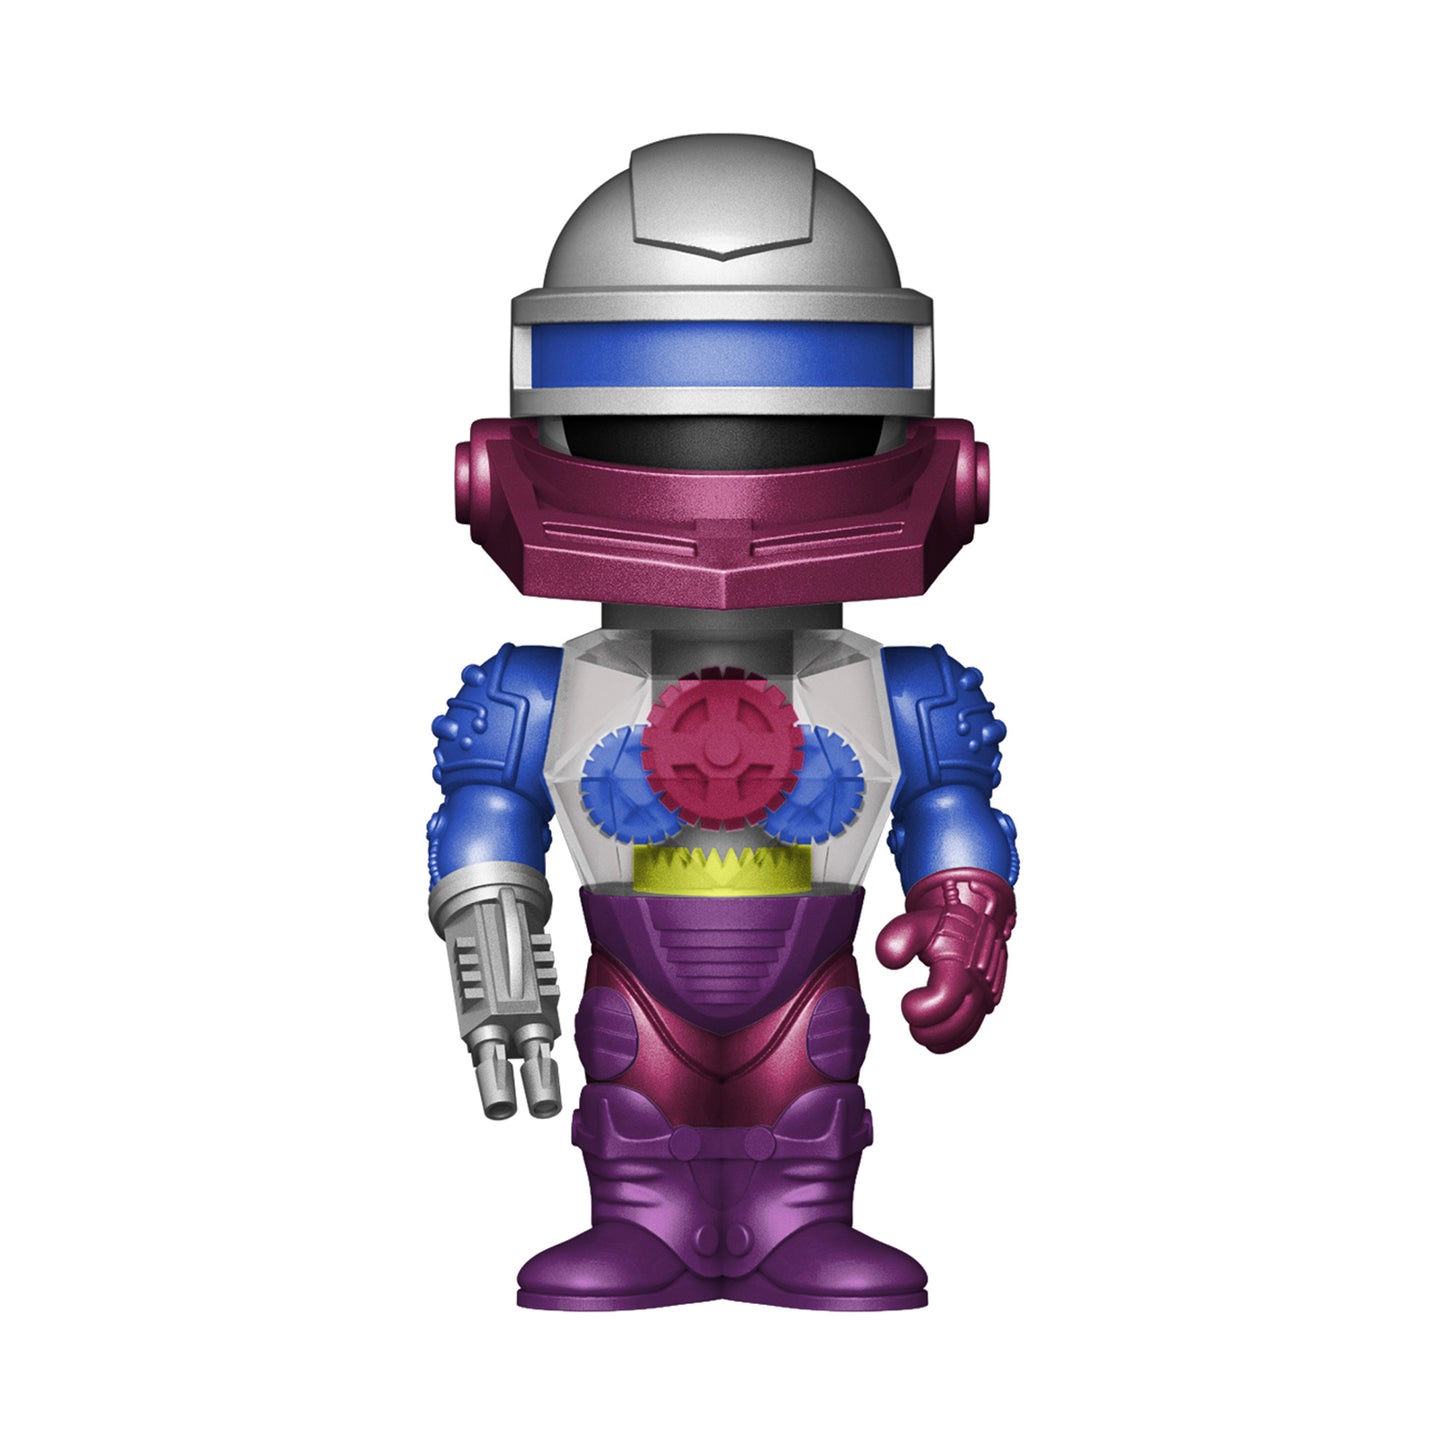 Funko Vinyl SODA: Roboto 5,000 Limited Edition (1 in 6 Chance at Chase)